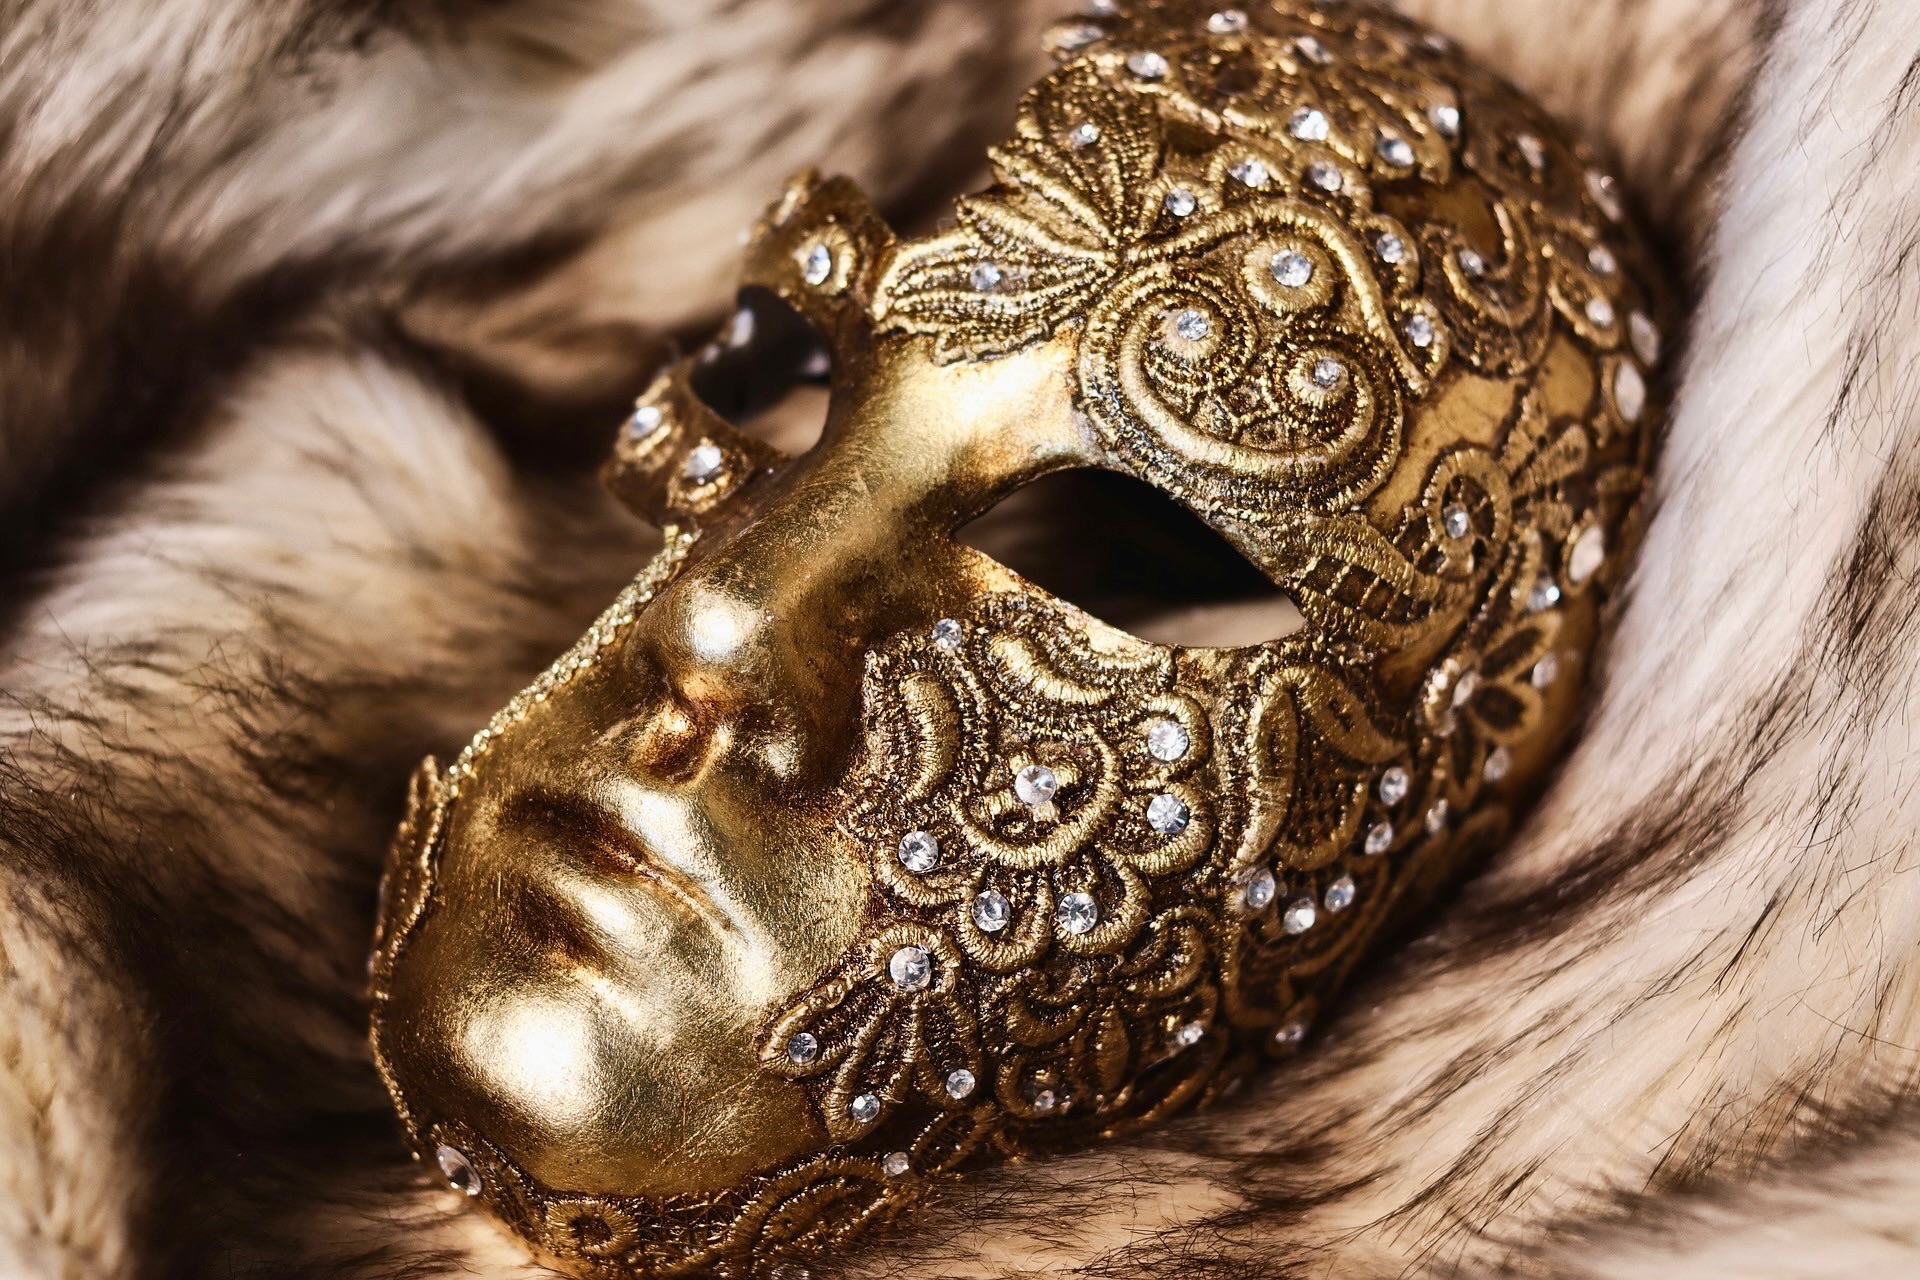 Gold full face masquerade mask on a fur rug